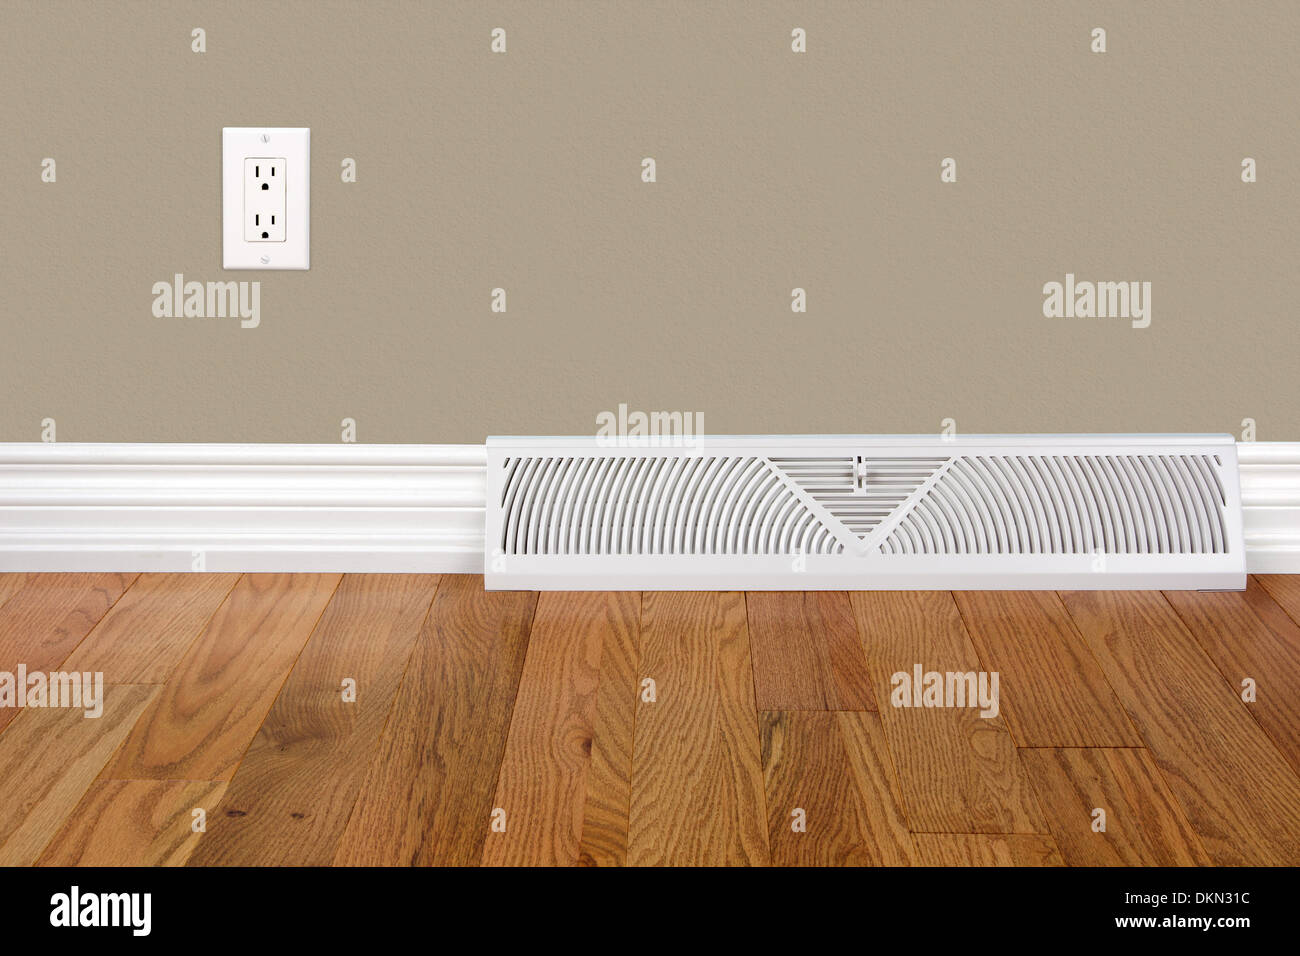 Bedroom wall with baseboard, heating register, electrical outlet and hardwood floor Stock Photo